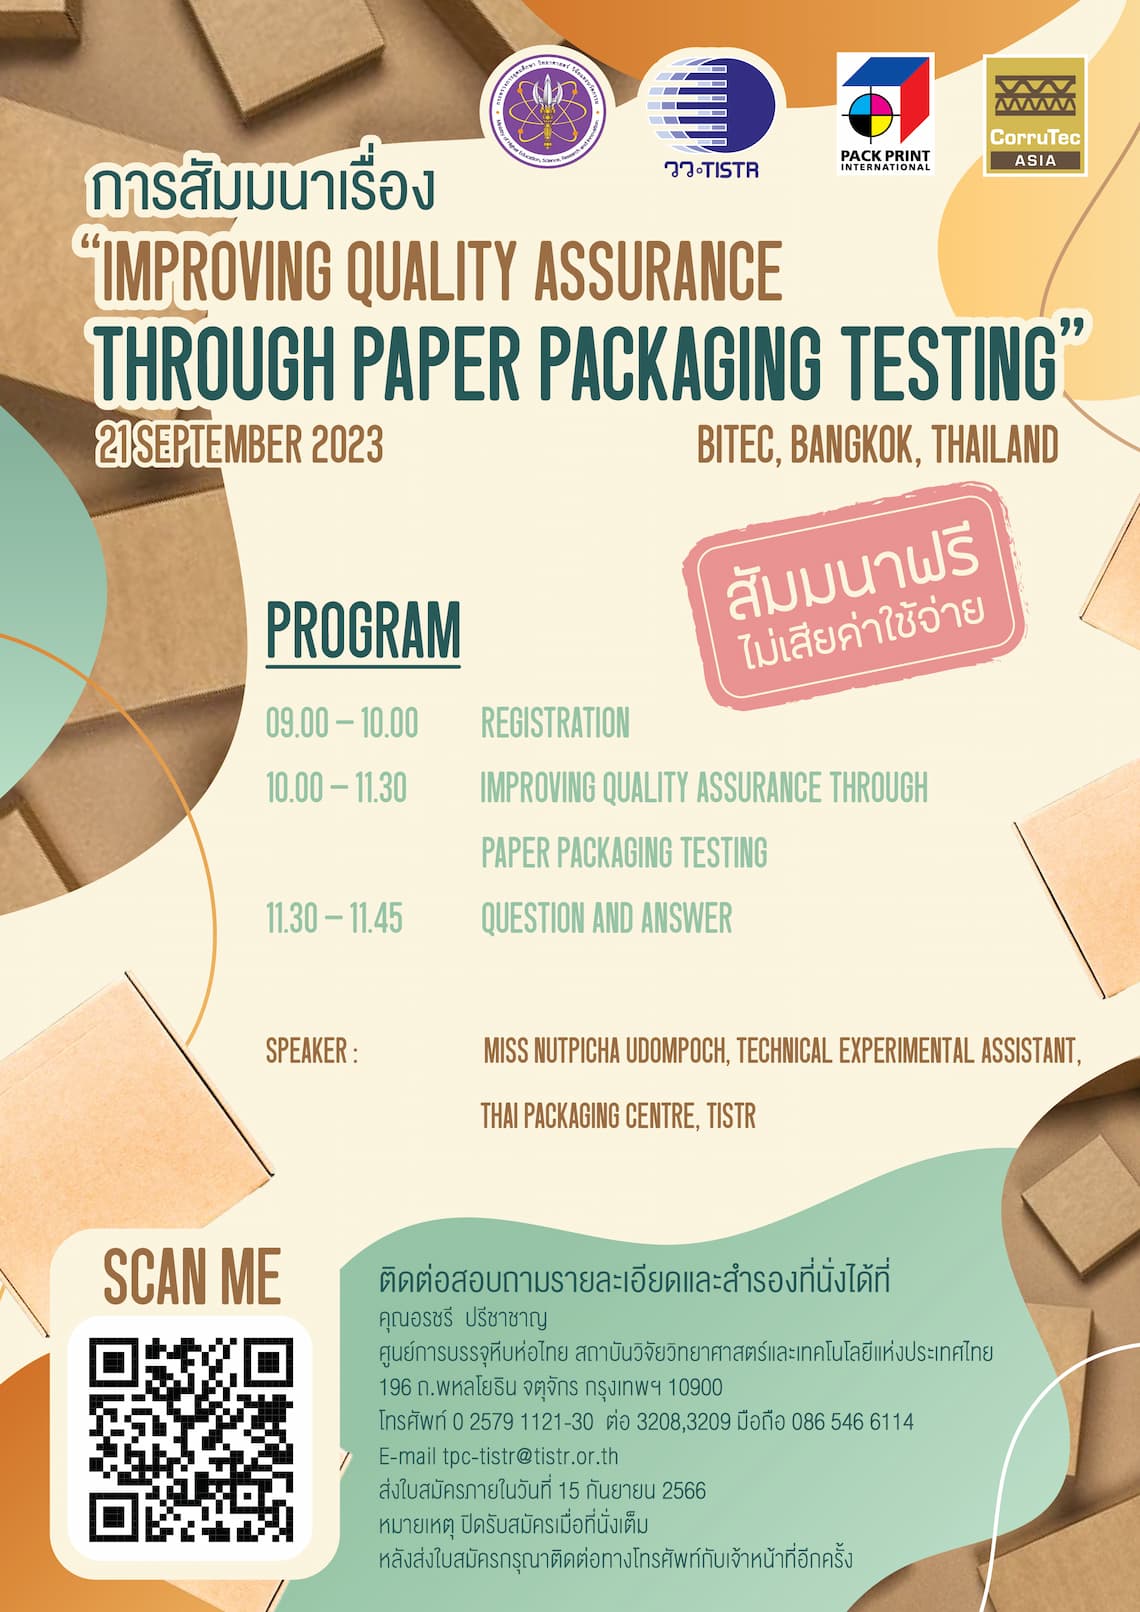 Improving Quality Assurance Through Paper Packaging Testing